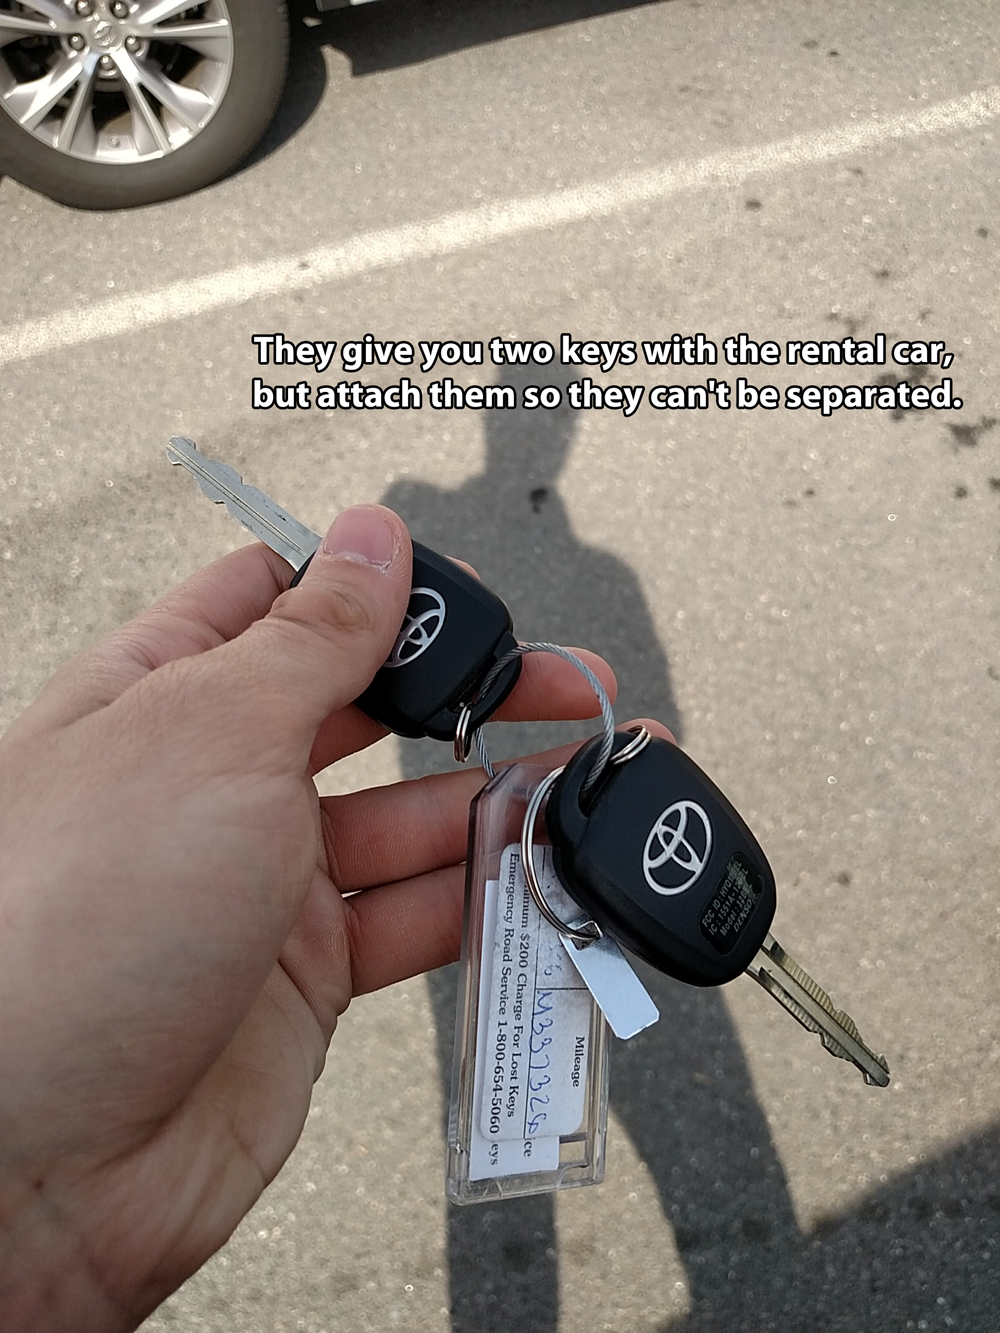 vehicle - They give you two keys with the rental car, but attach them so they can't be separated. Adsl